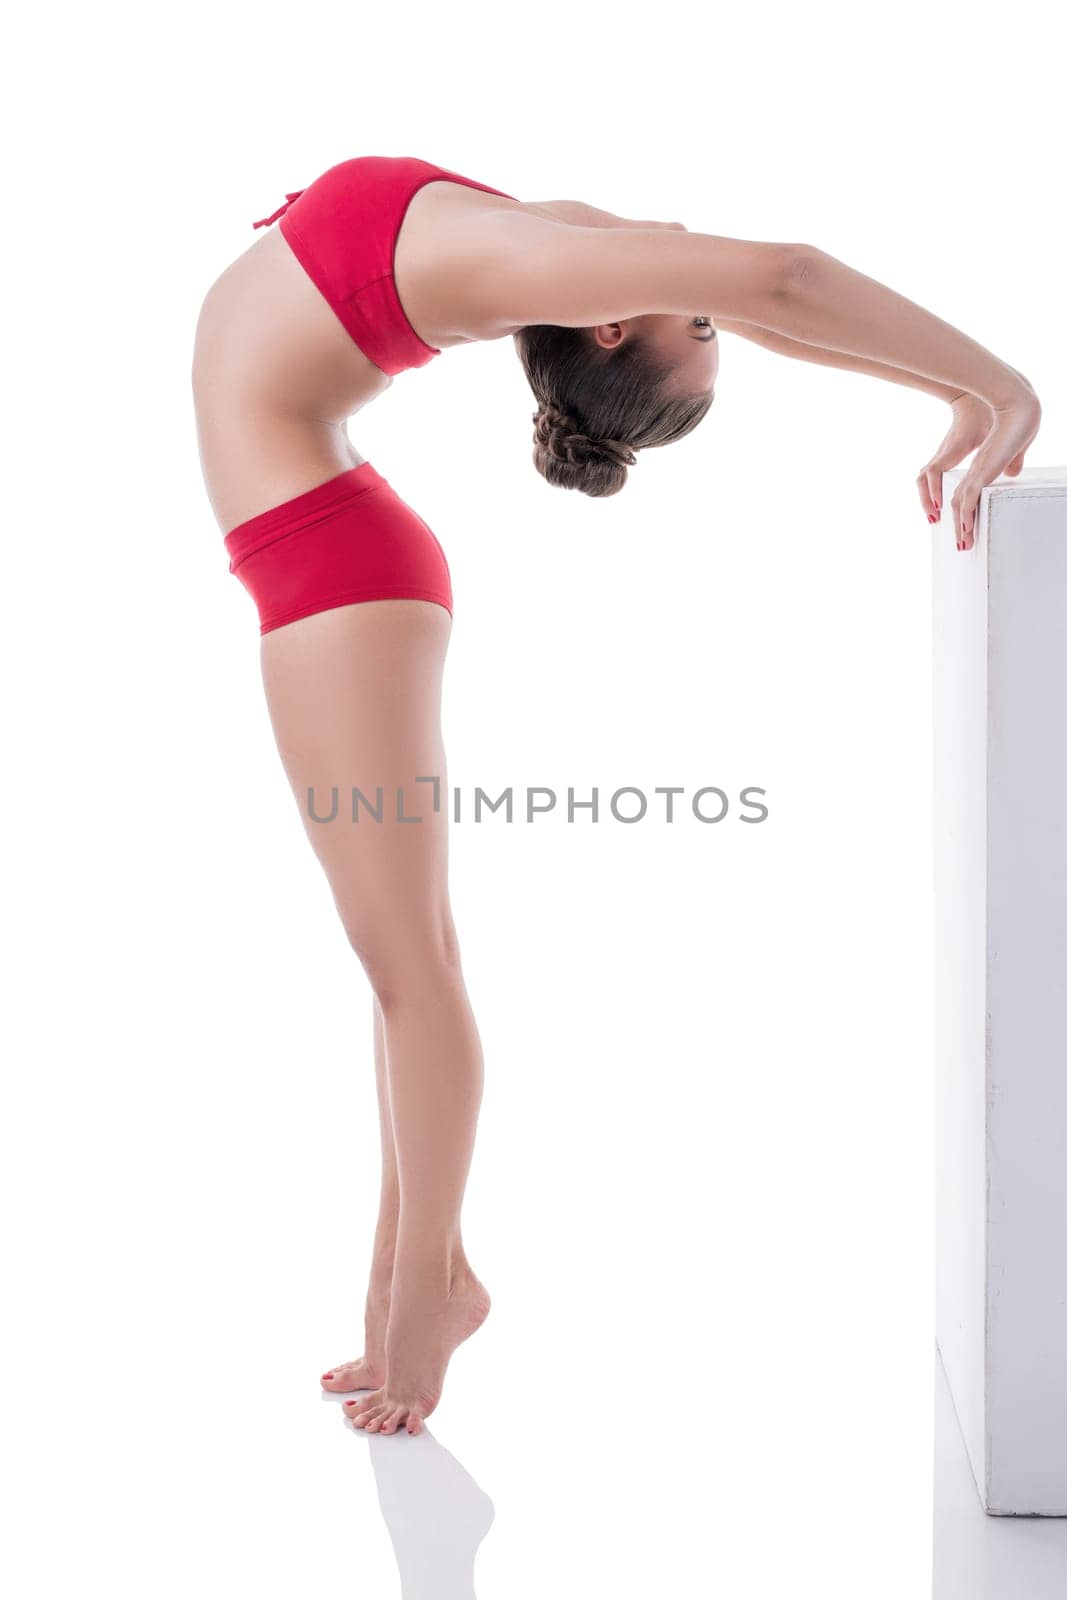 Lovely gymnast arched her back while standing on tiptoe